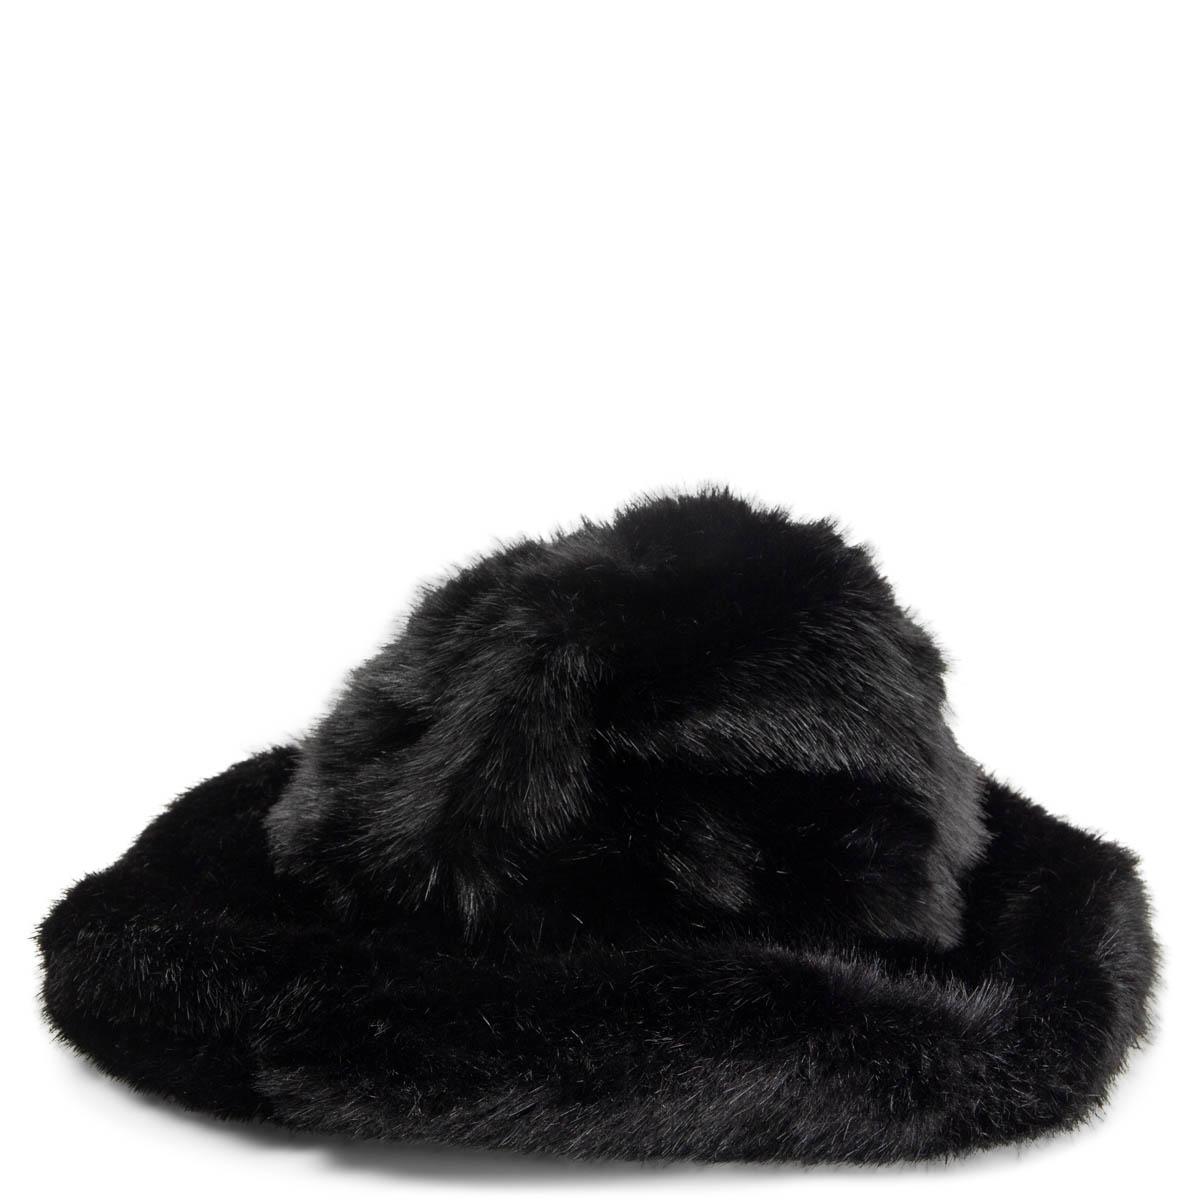 100% authentic Tom Ford FA 2019 wide-brim hat in black faux mink fur. Comes in one size but can get made smaller by drawstrings. Has been worn and is in excellent condition. Comes with dust bag. 

Measurements
Tag Size	OS
Inside Circumference	56cm